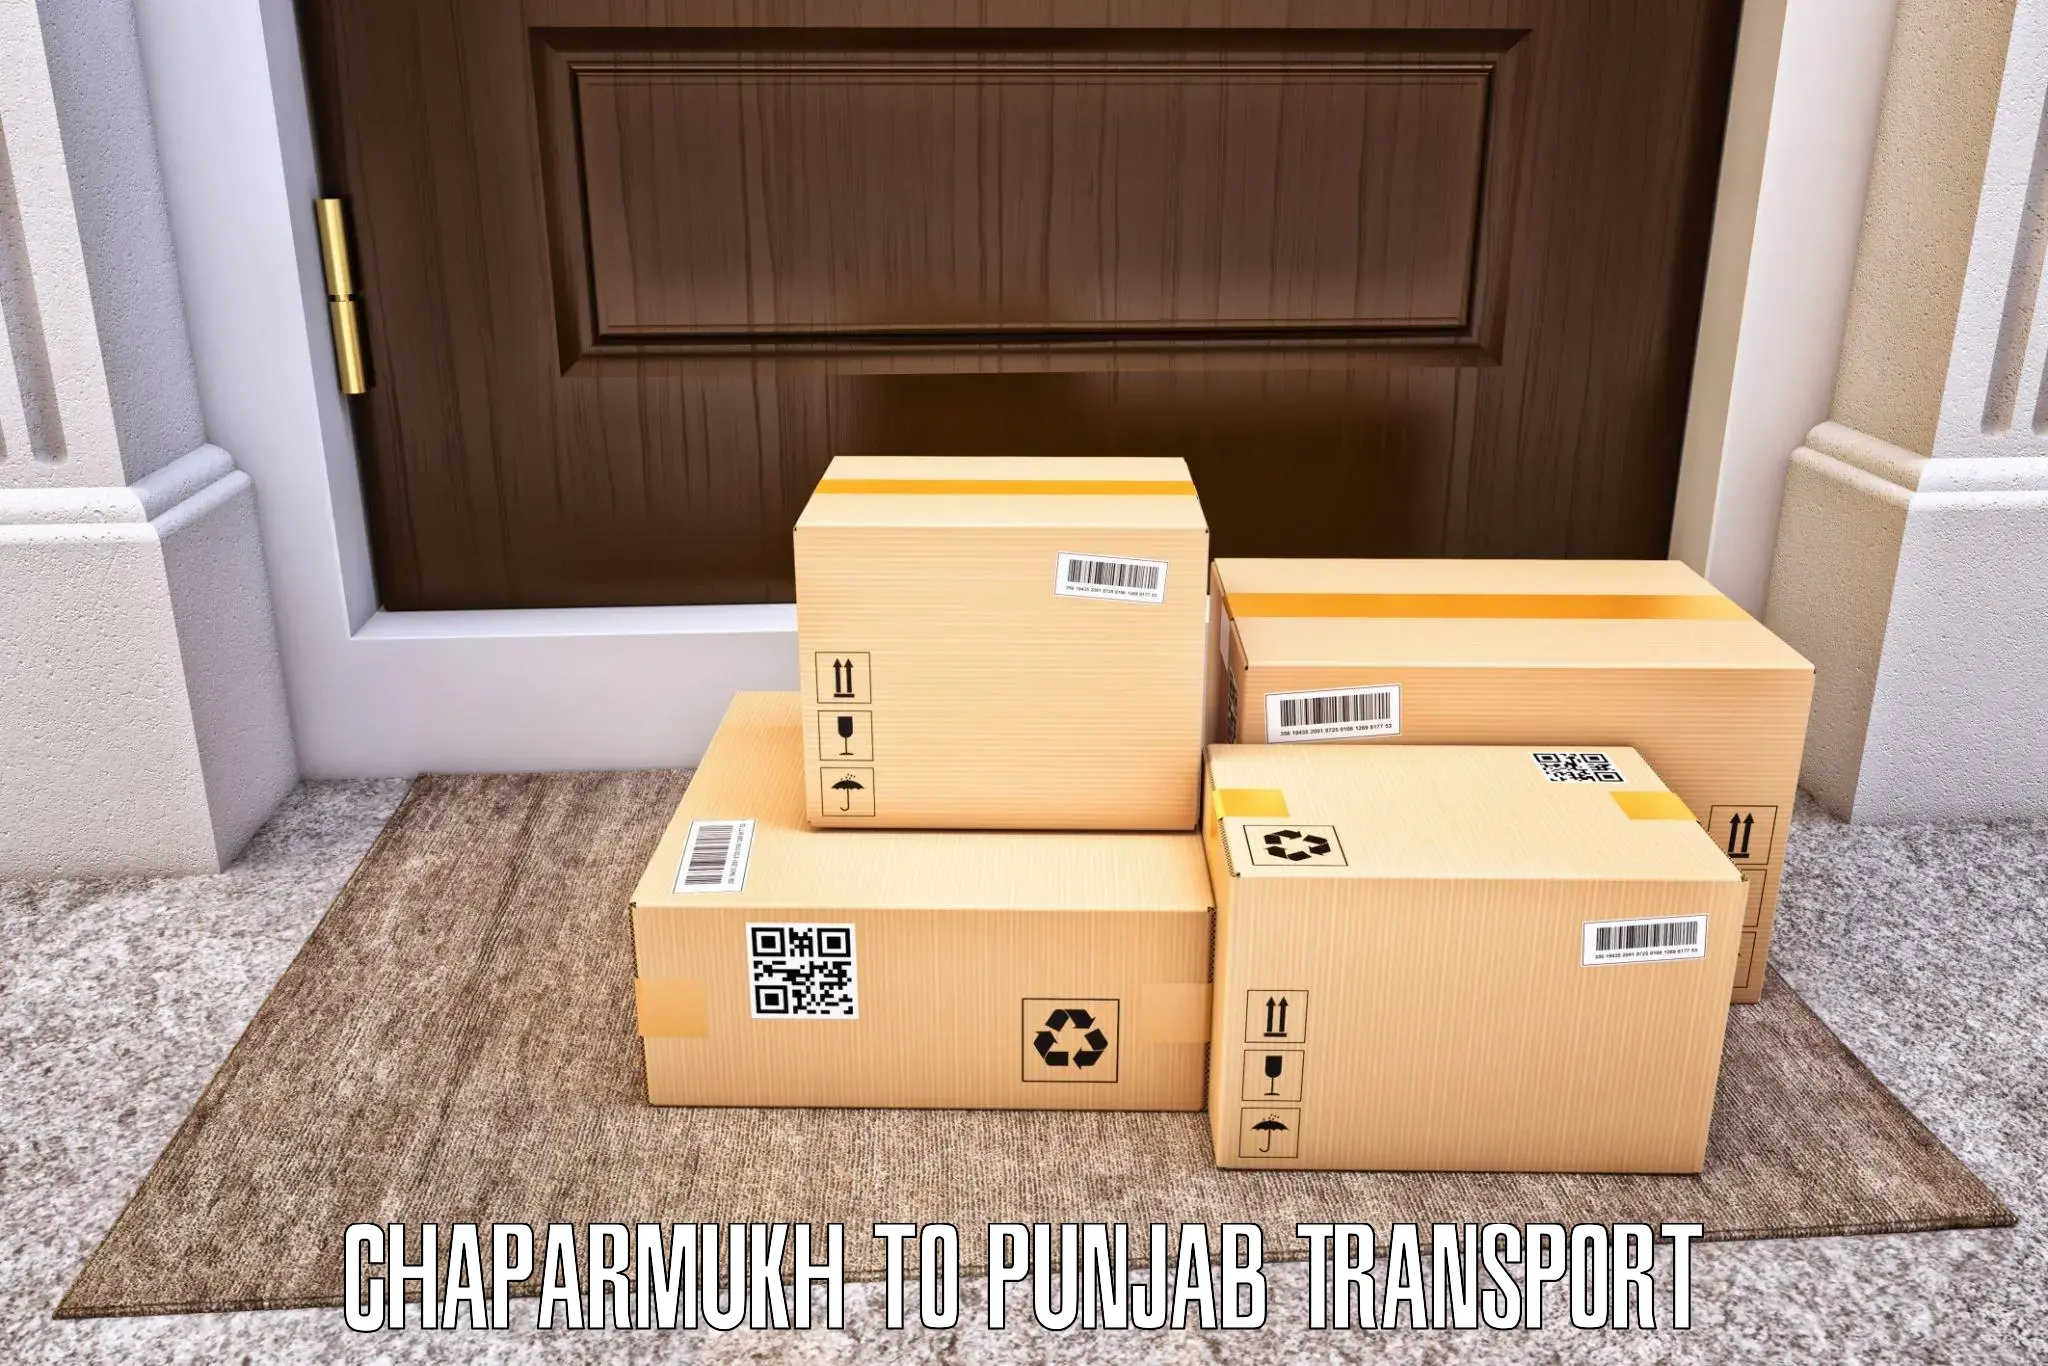 Cargo transport services Chaparmukh to Sultanpur Lodhi